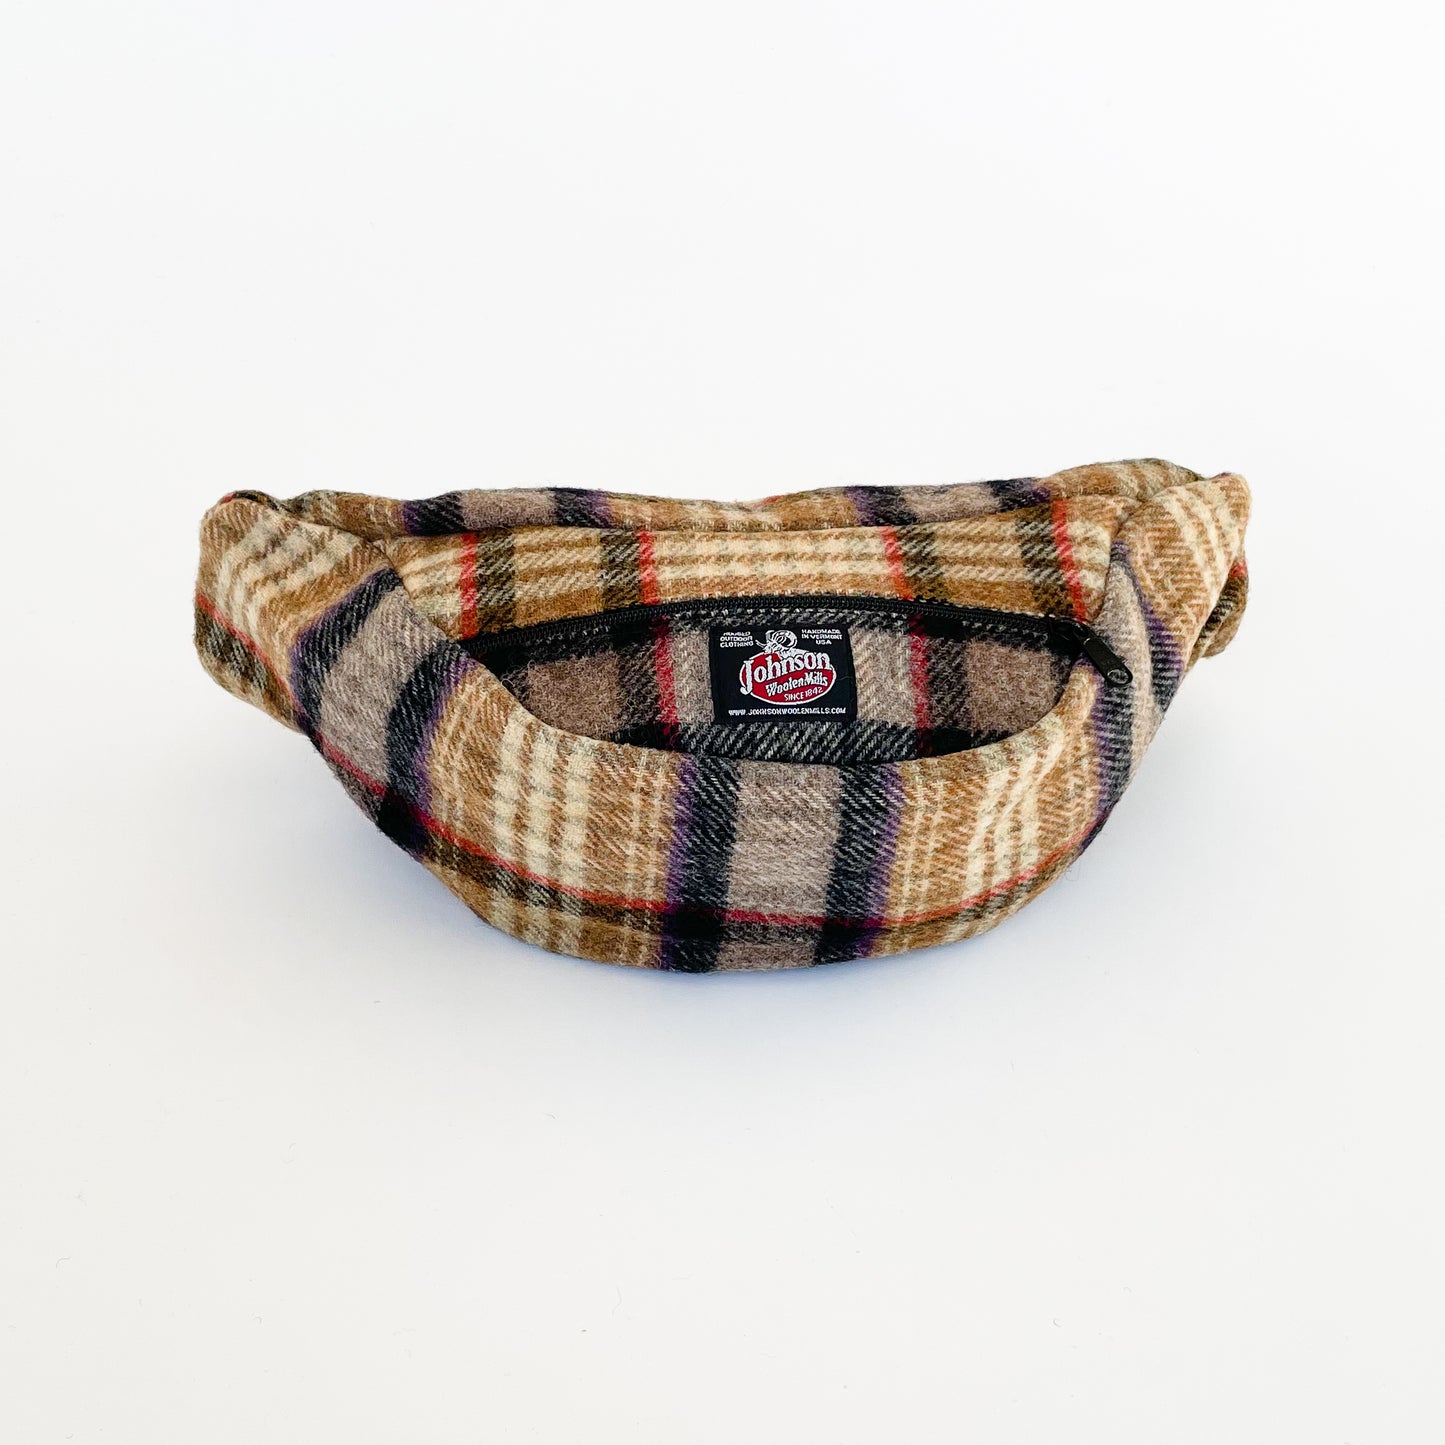 Johnson Woolen Mills Oversized Fanny Pack Gold/Black/Red Plaid front view